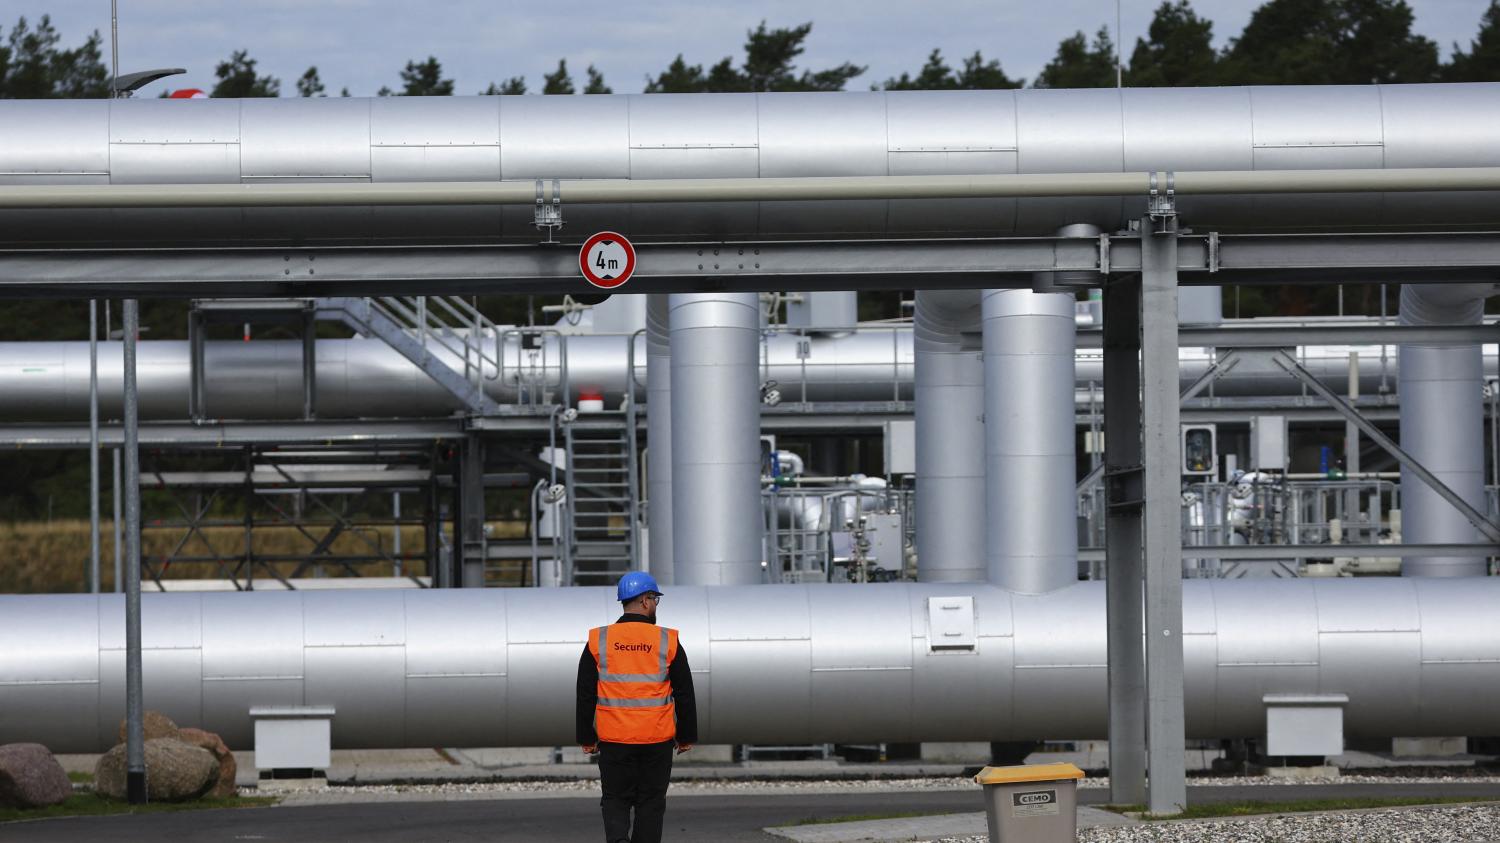 Pro-Ukrainian Group Suspected of Attack on Nord Stream Pipeline, Costing Up to $500 Million in Repairs